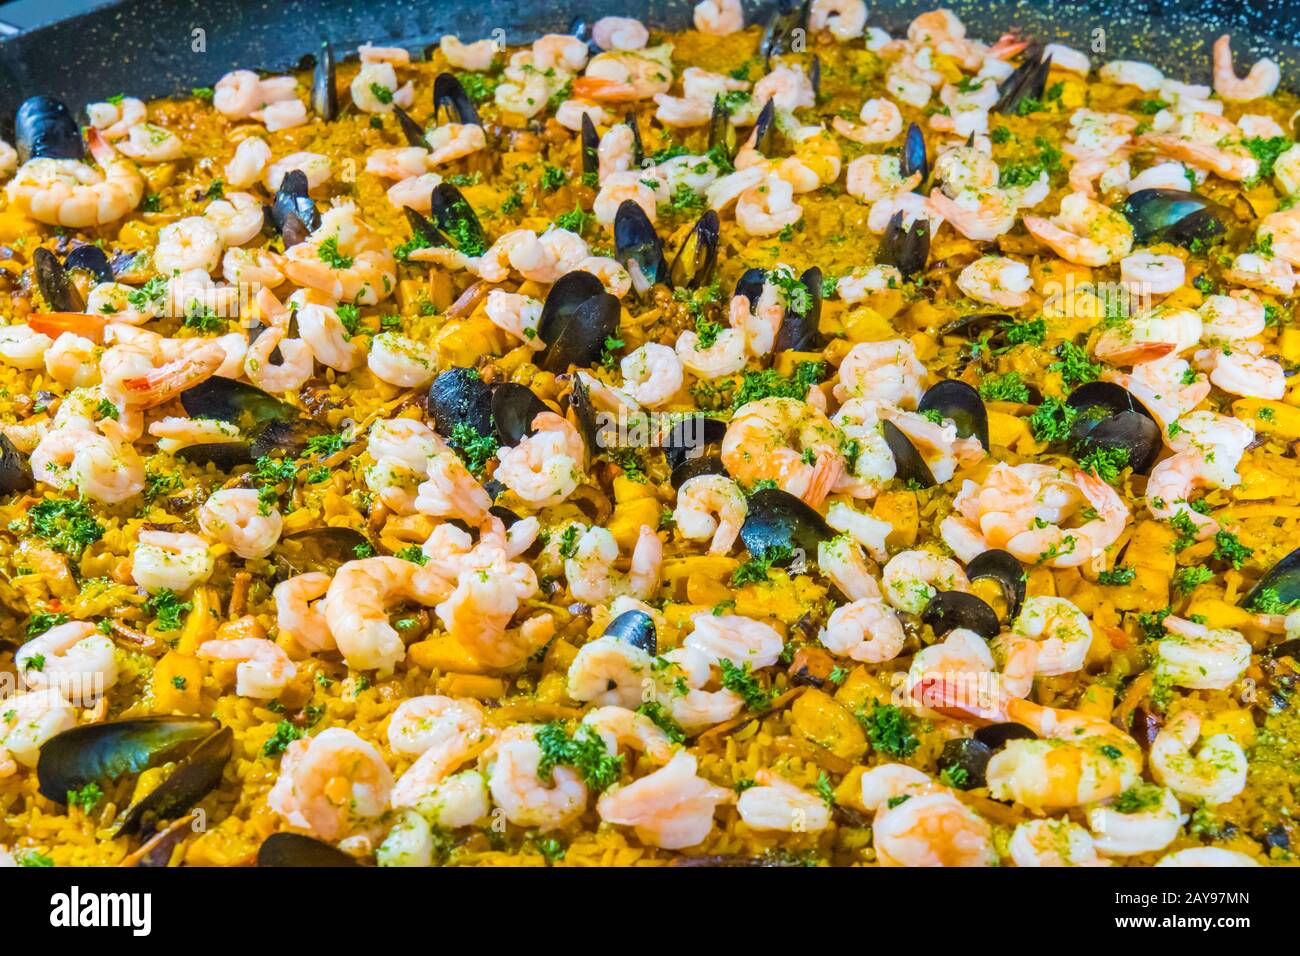 detail of the famous Spanish dish called Paella made with rice vegetables and seafood Stock Photo